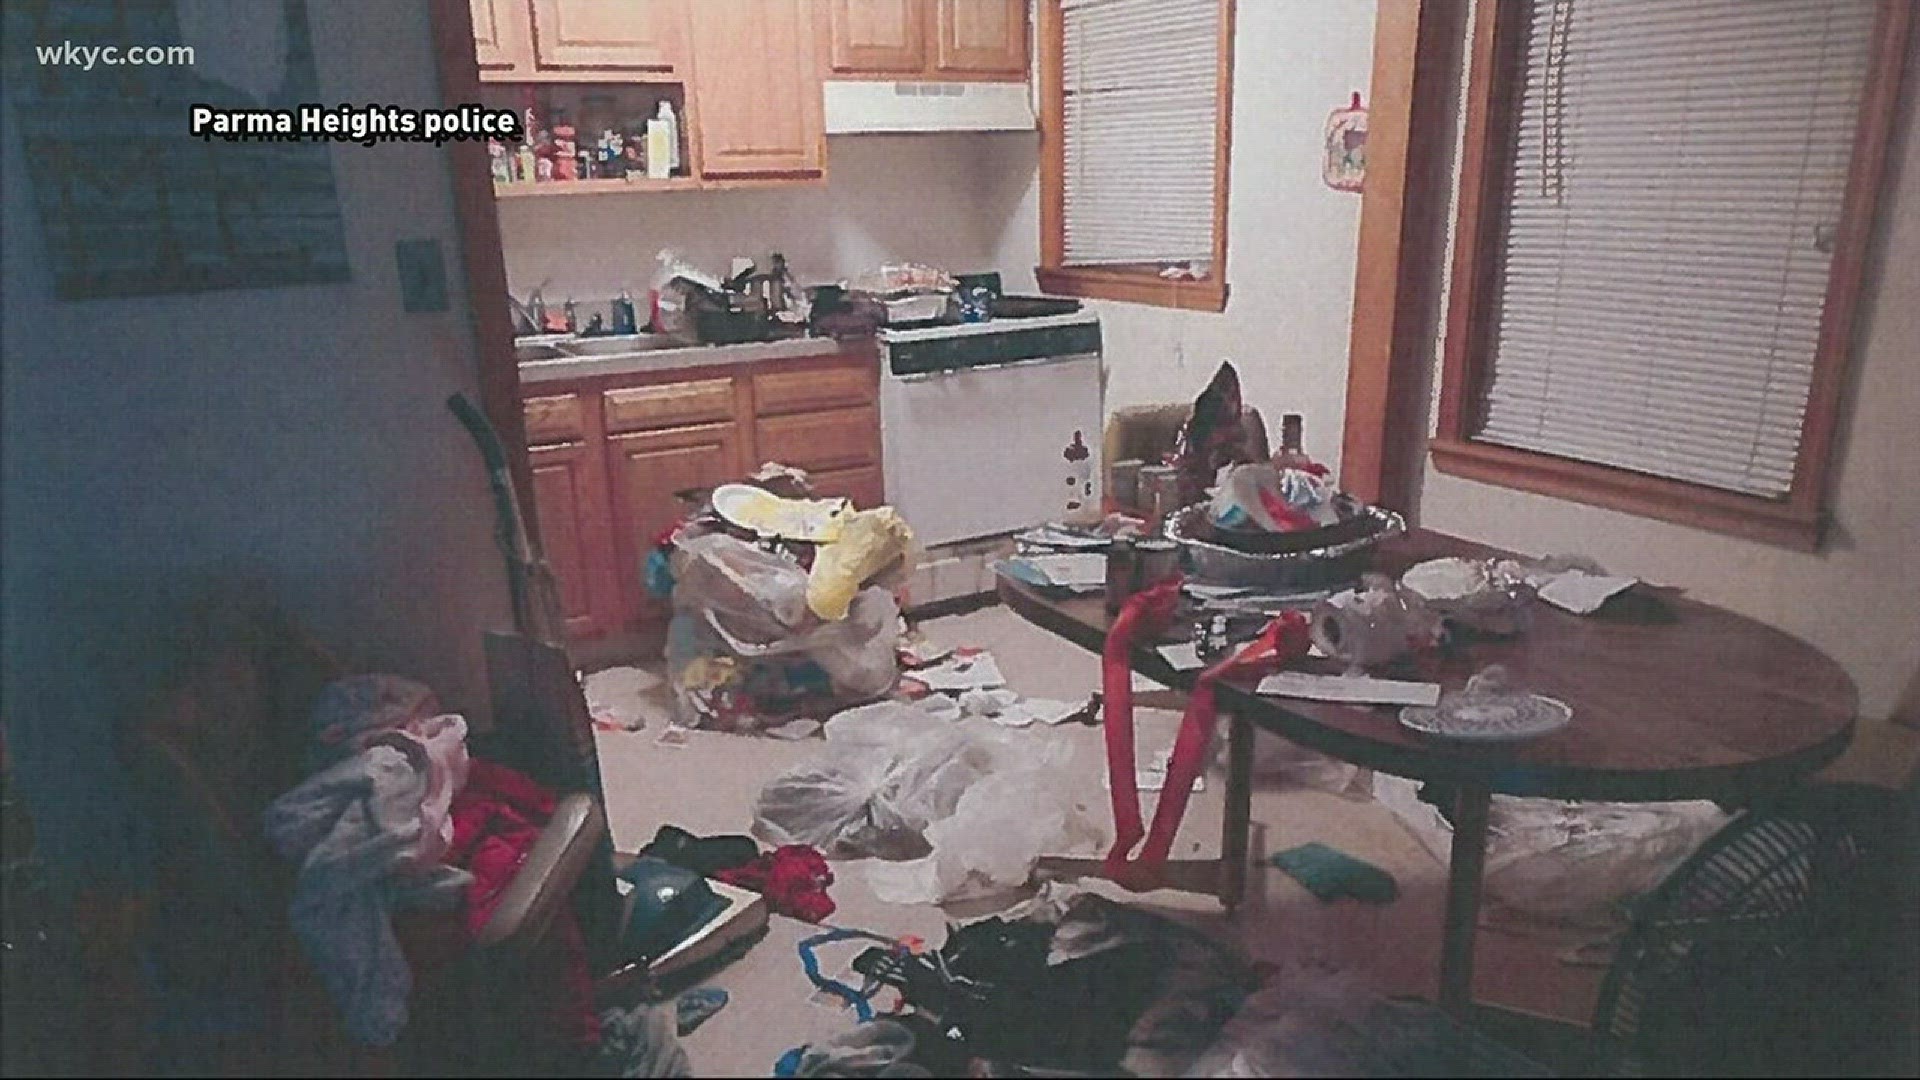 Parma Heights mother charged with child endangerment due to 'deplorable conditions' inside home